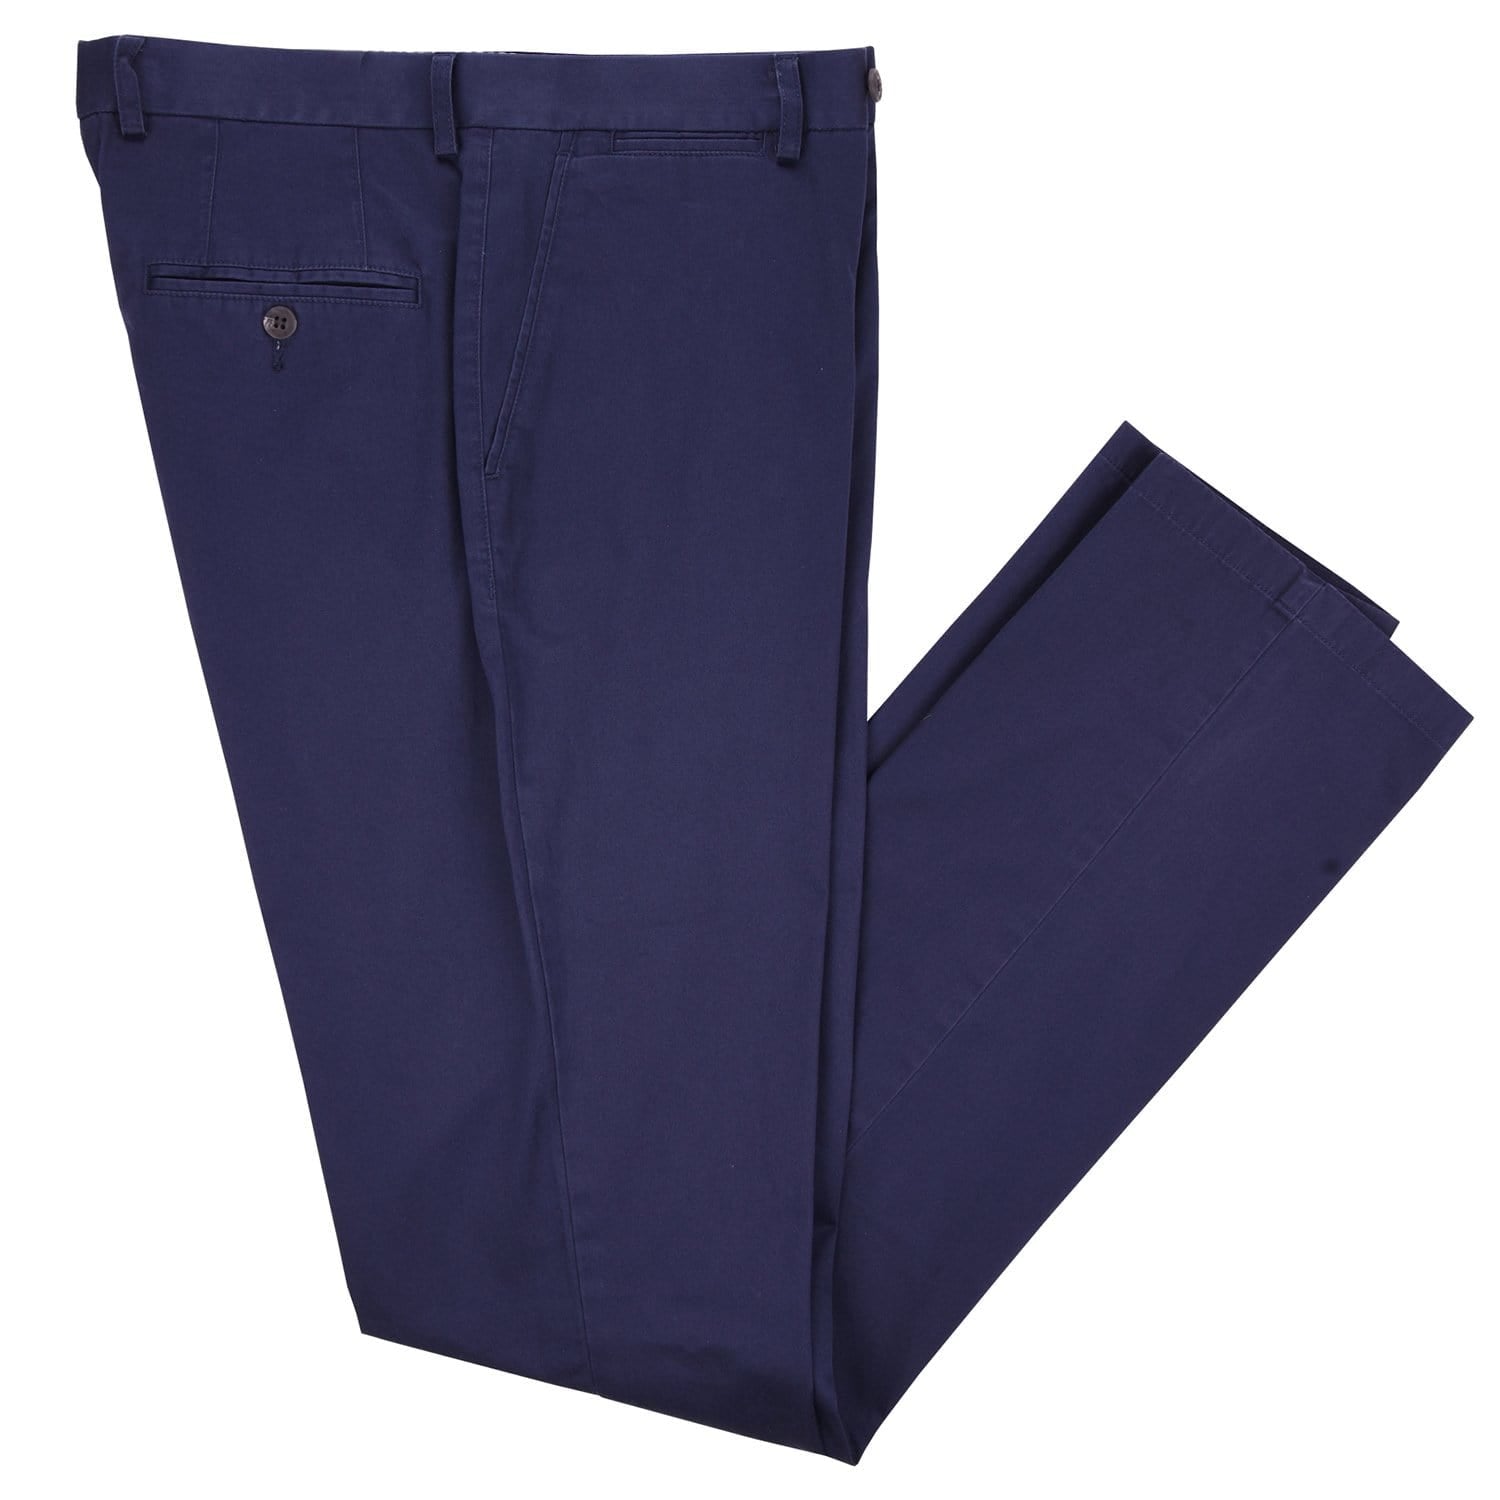 Lafitte Peacoat Cotton Twill Chino - Haspel ClothingClark Kent by day, Superman by night. A good pair of navy twill pants can transform you from supervisor to superhero with the change of a shirt. So drop the emails and pick up the tab hero.  100% Cotton • Flat Front Pant • Bottoms Finished at 37" Long 